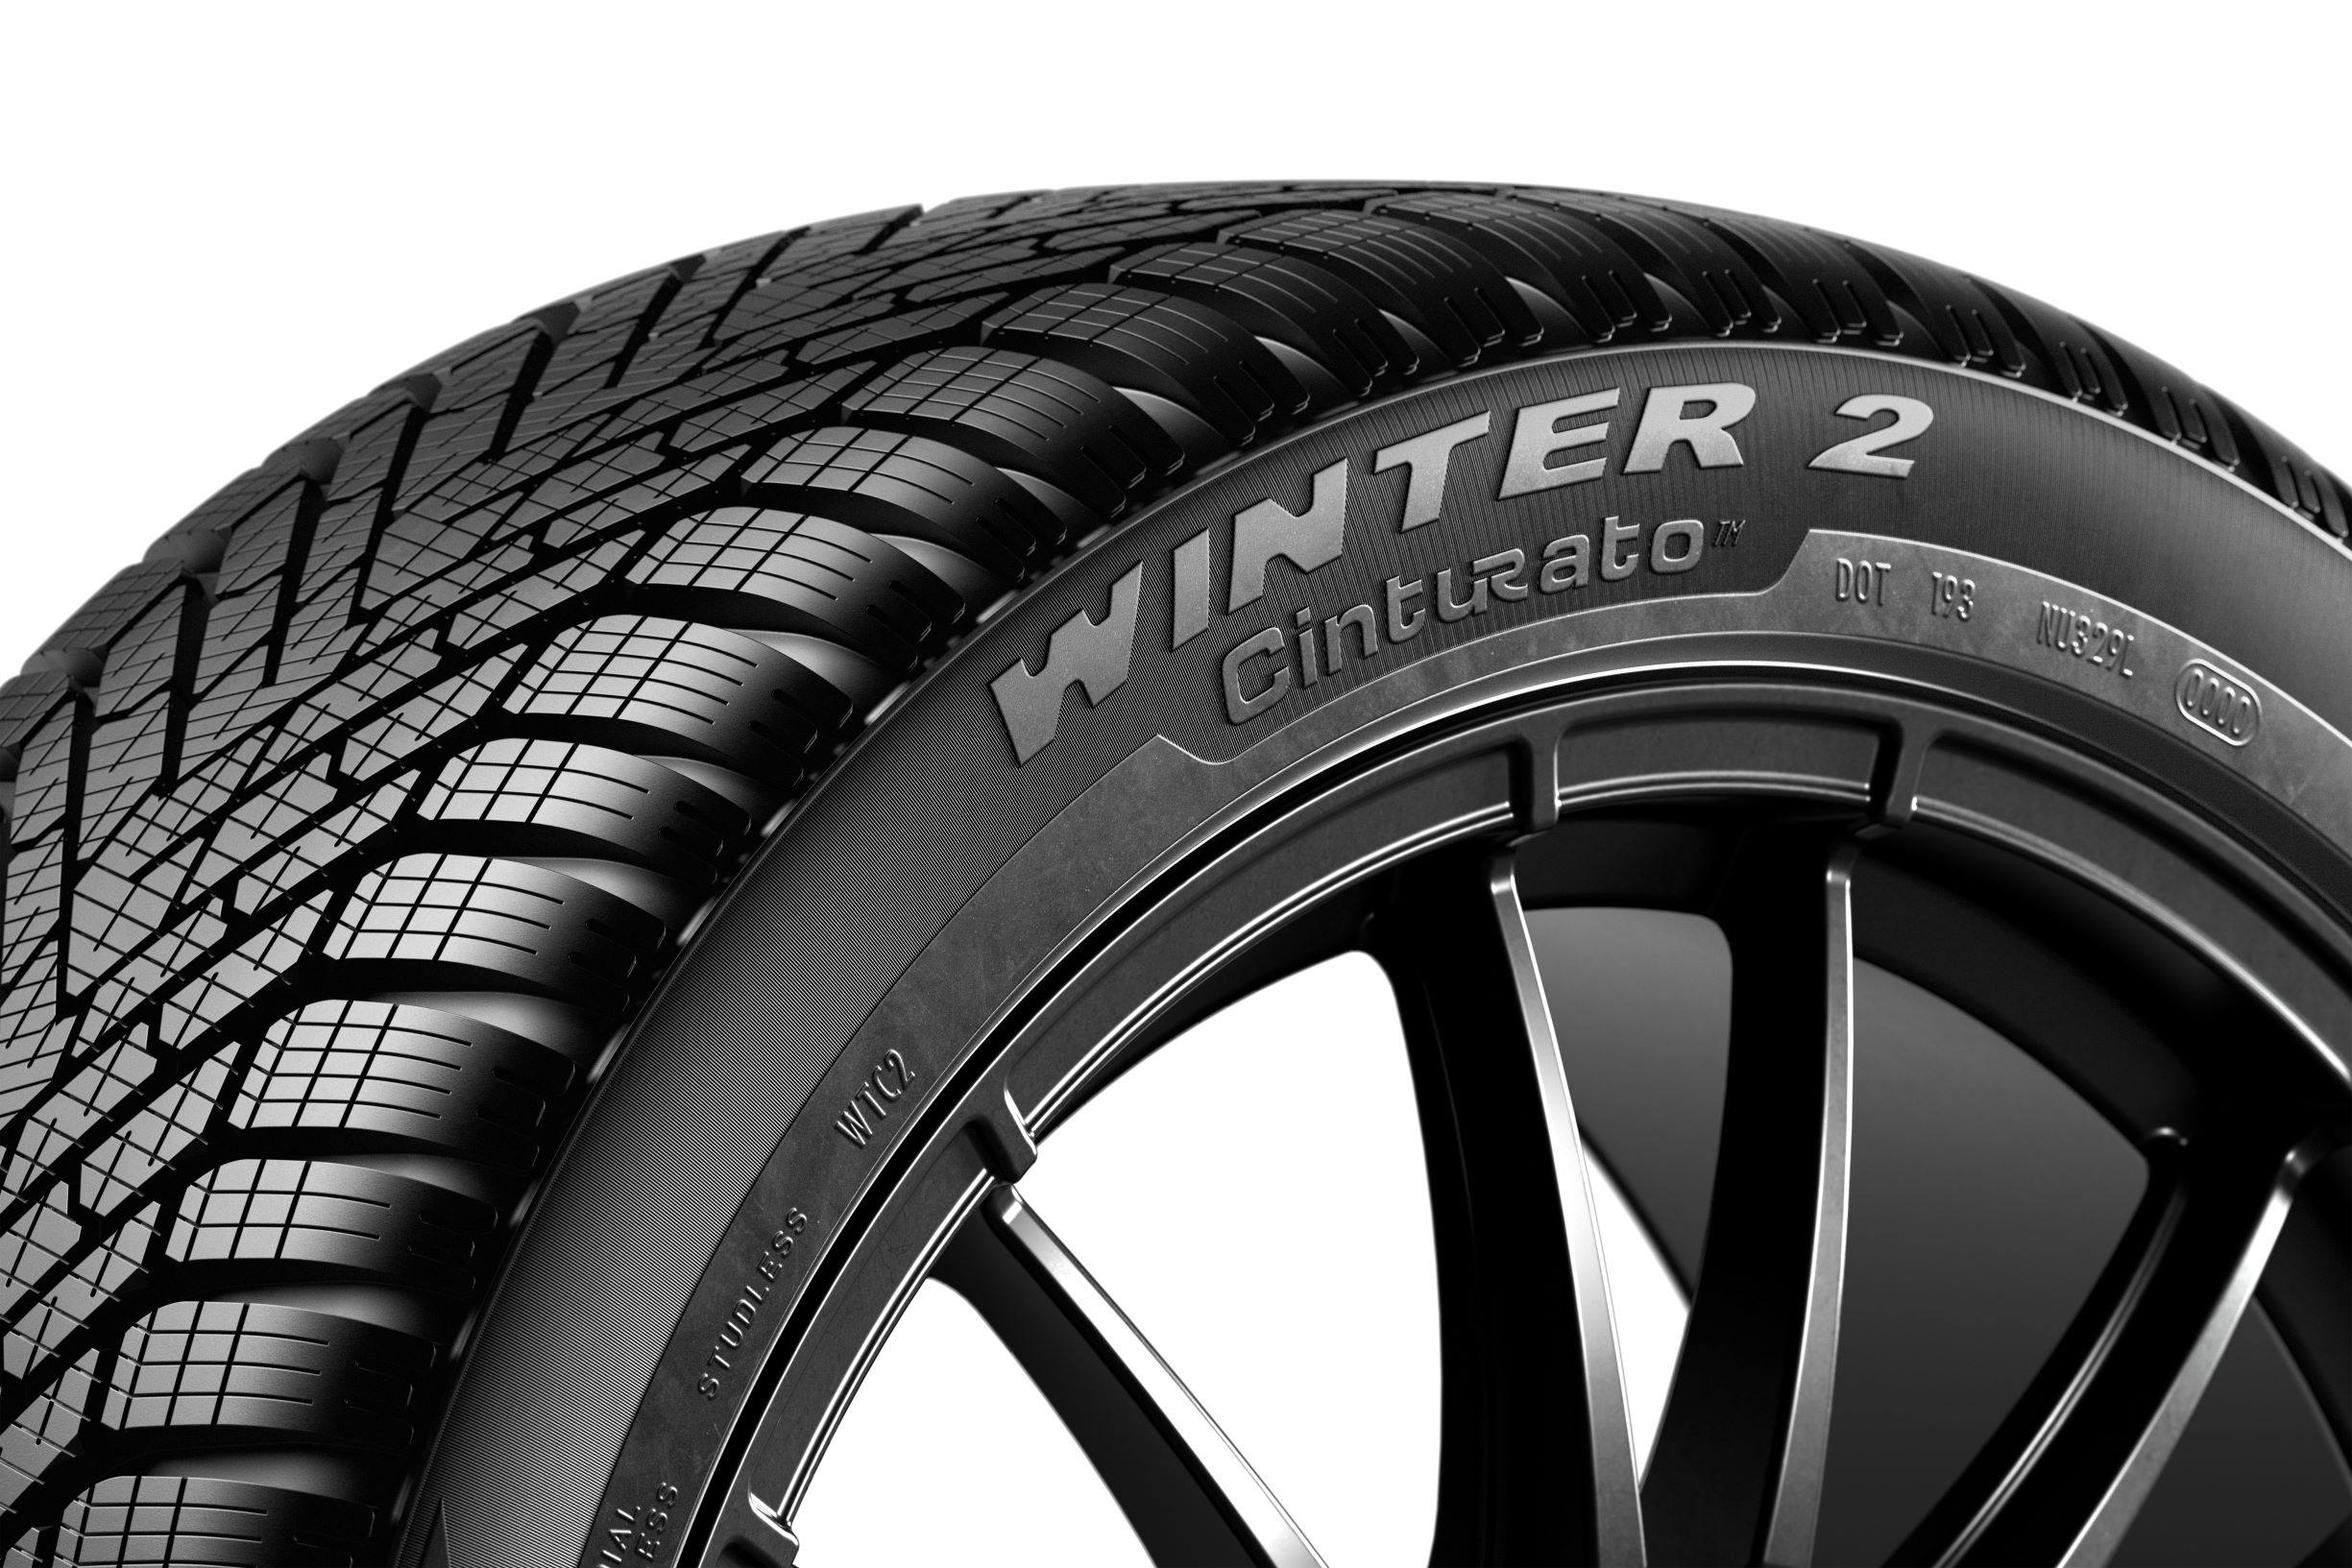 Pirelli Cinturato Winter 2: the tire that gets better in time